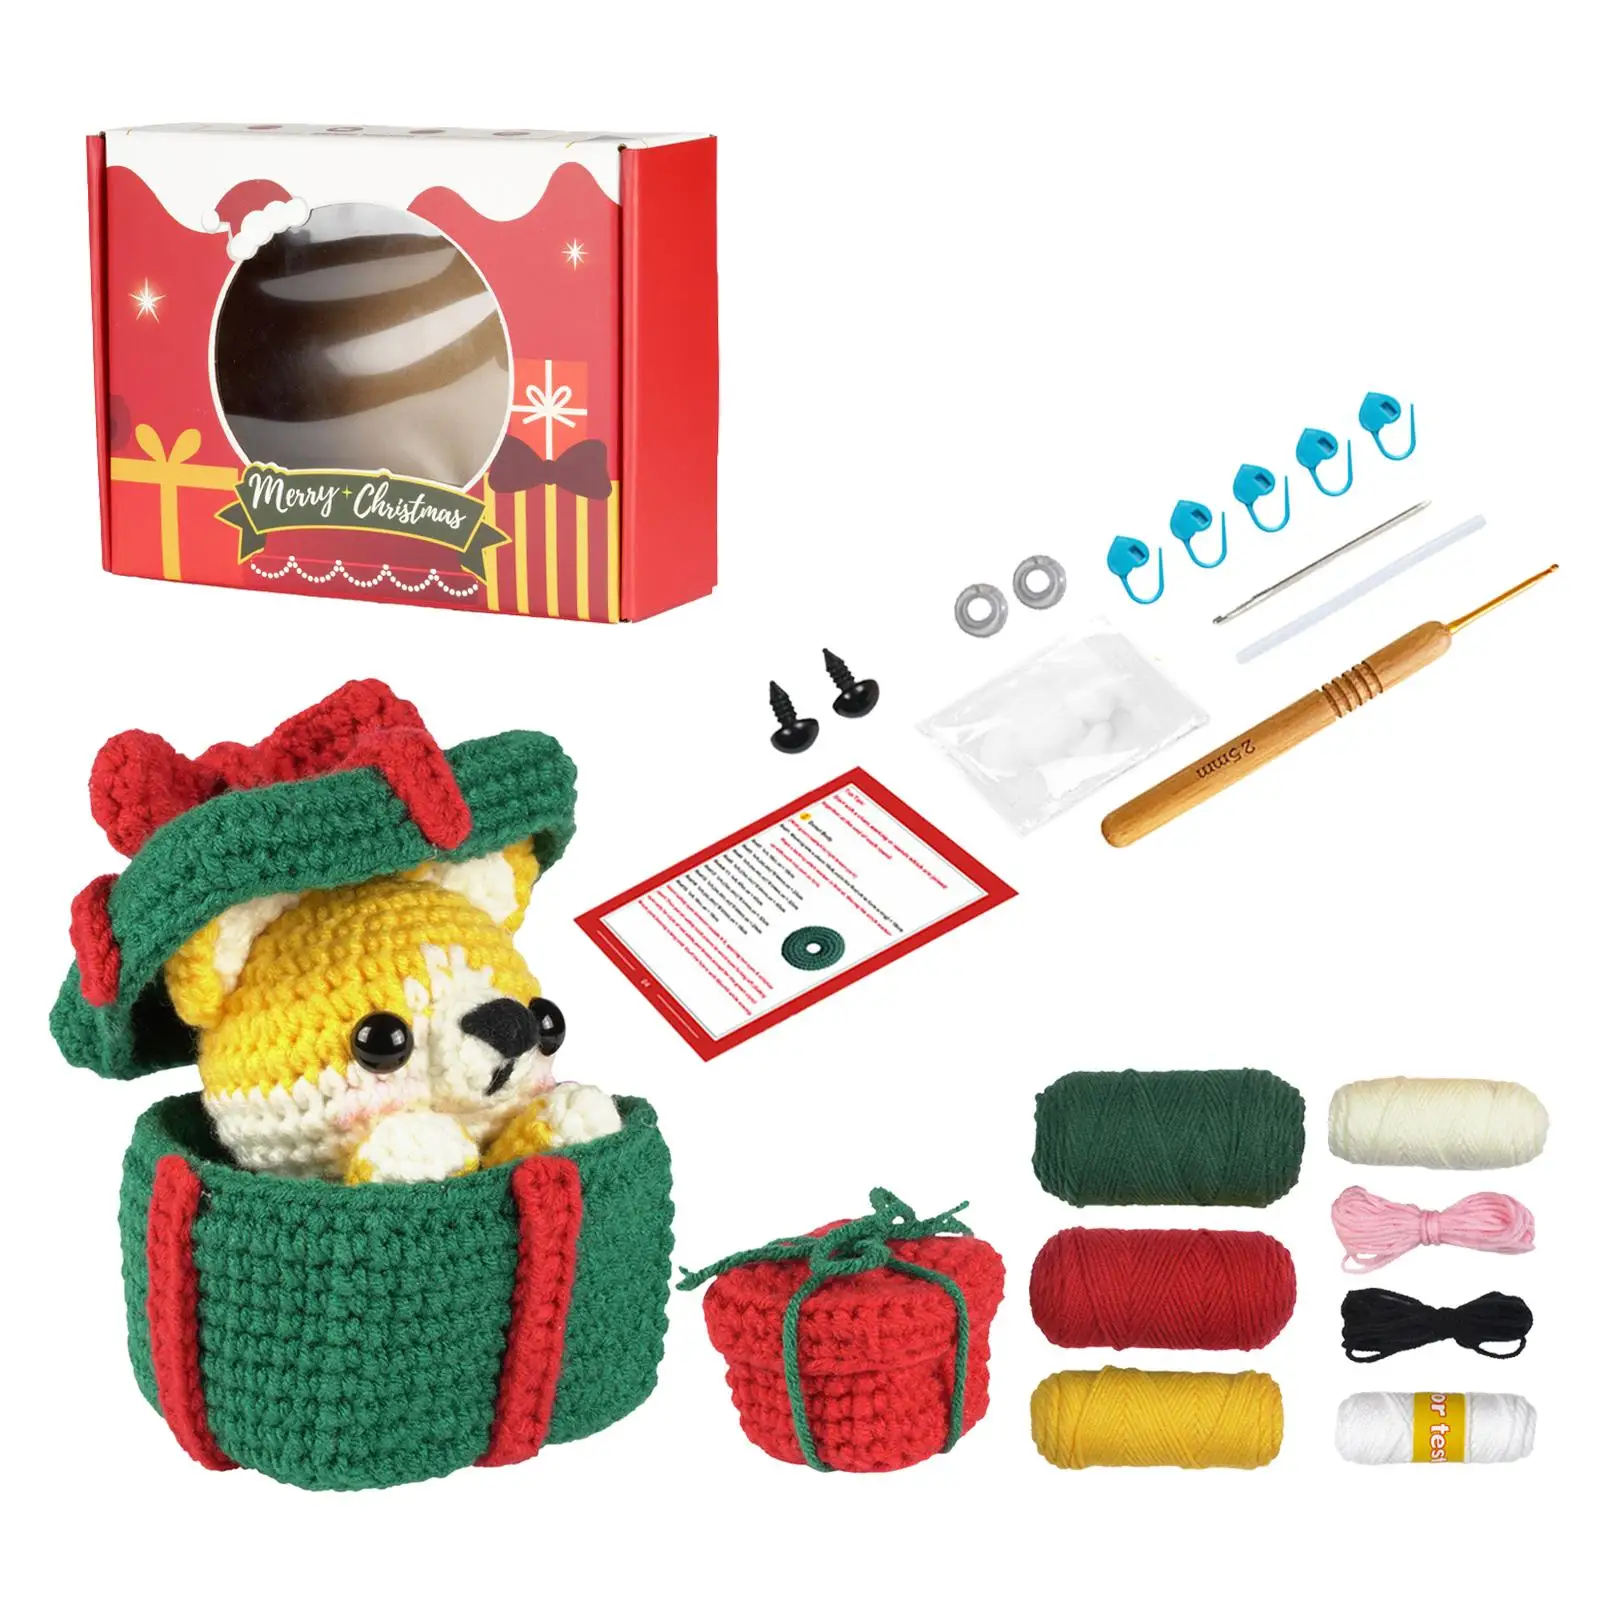 Christmas Crochet Kits Make Your Own Doll for Beginners for Christmas Gift Birthday Gift Porches Fireplaces Christmas Tree